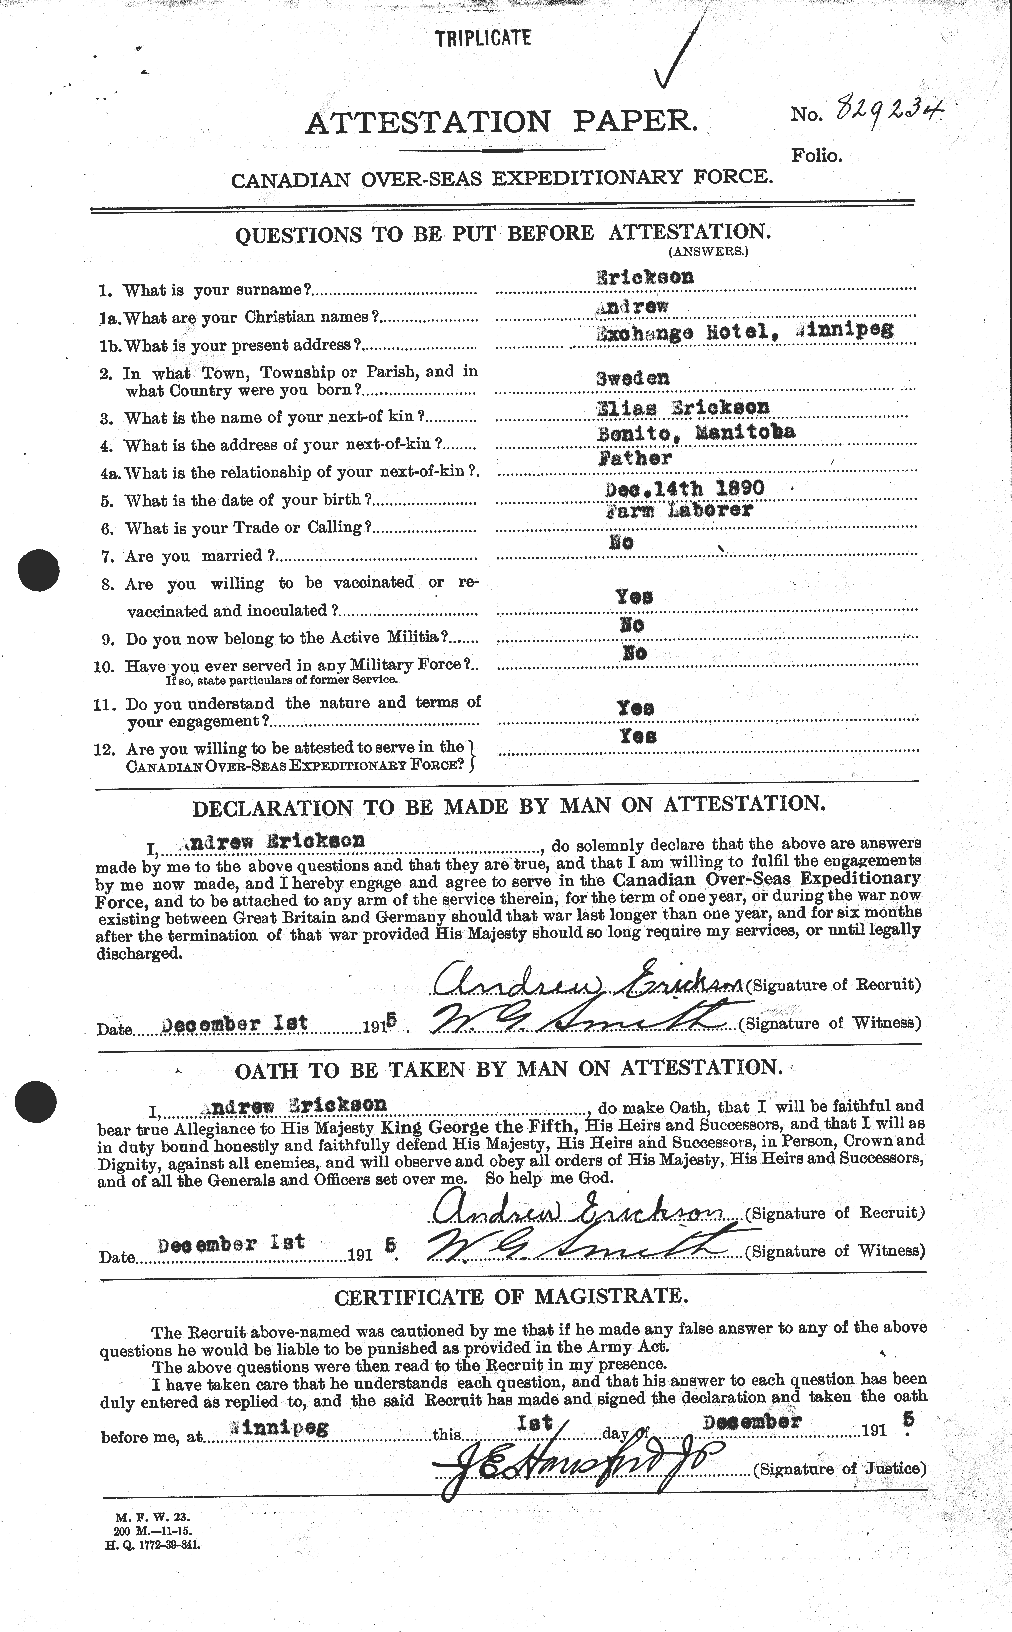 Personnel Records of the First World War - CEF 313340a